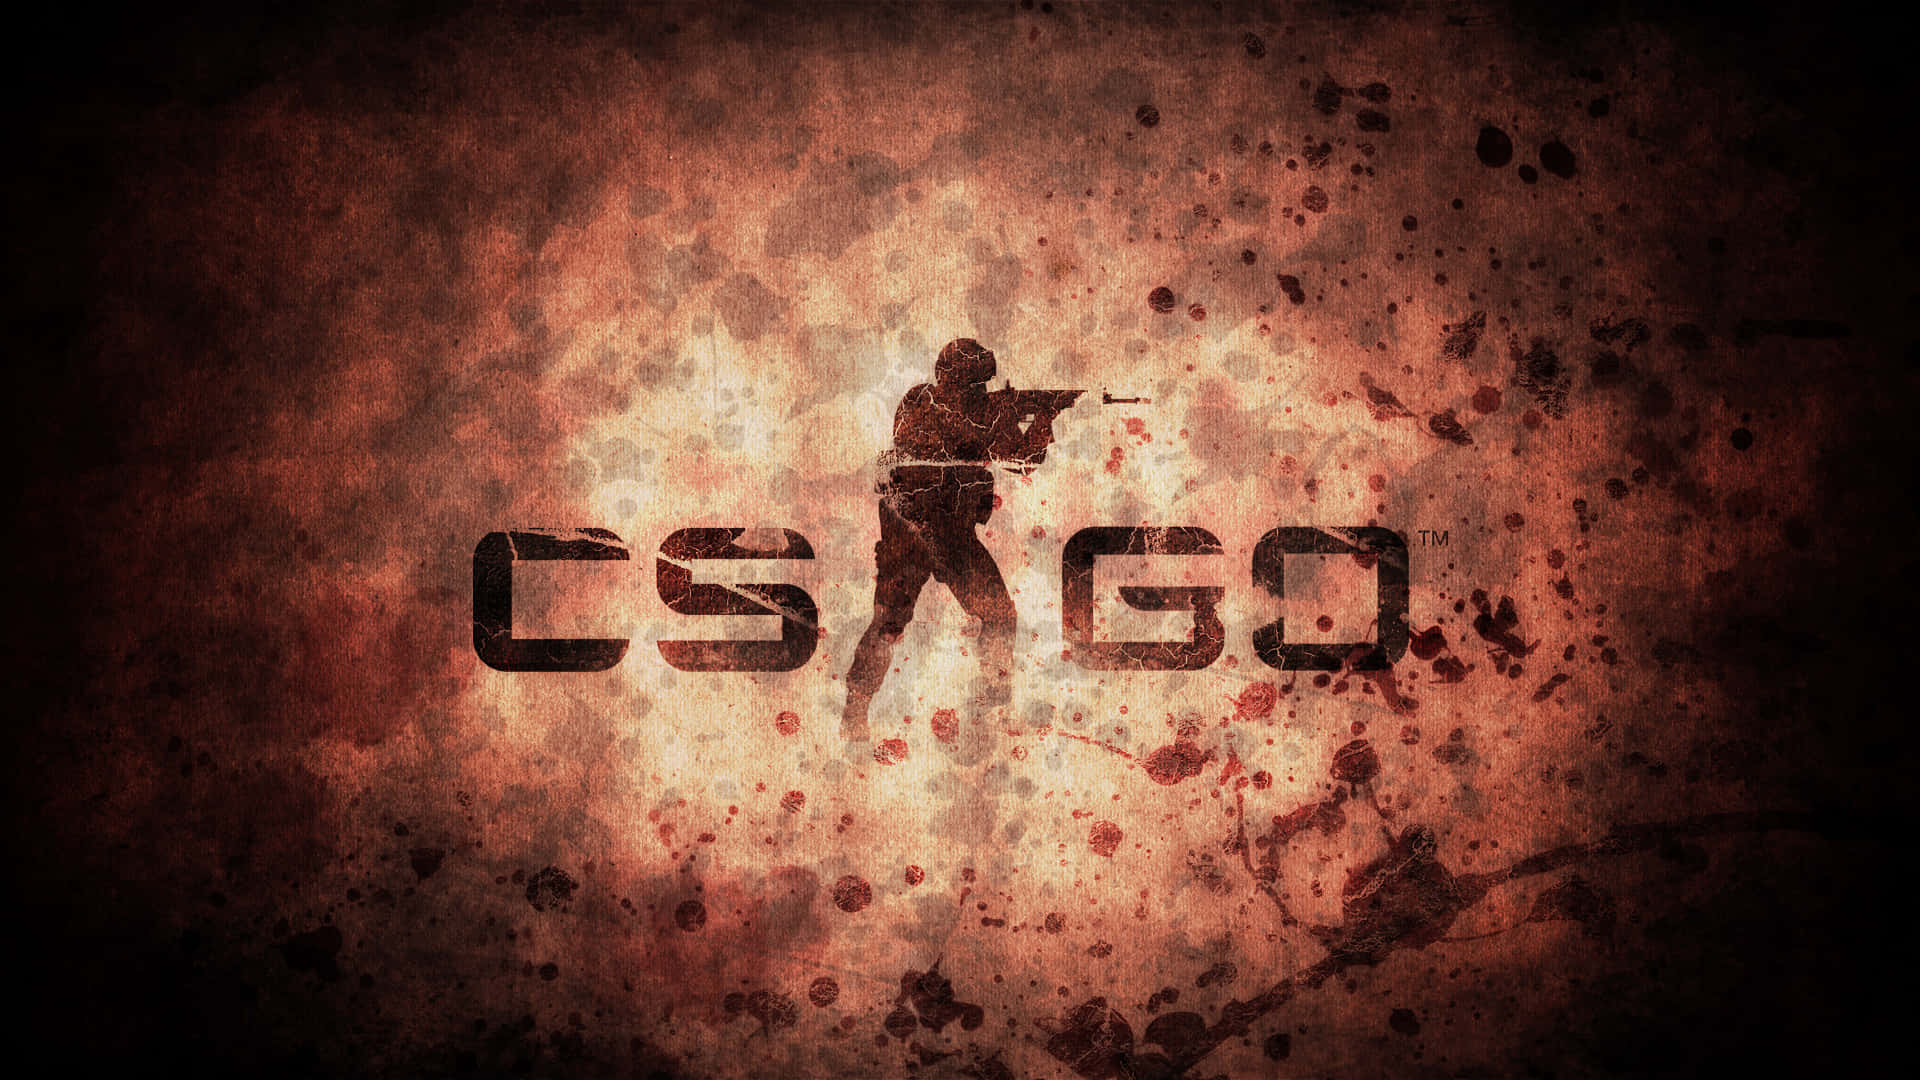 Dark And Messy 1080p Counter Strike Global Offensive Background